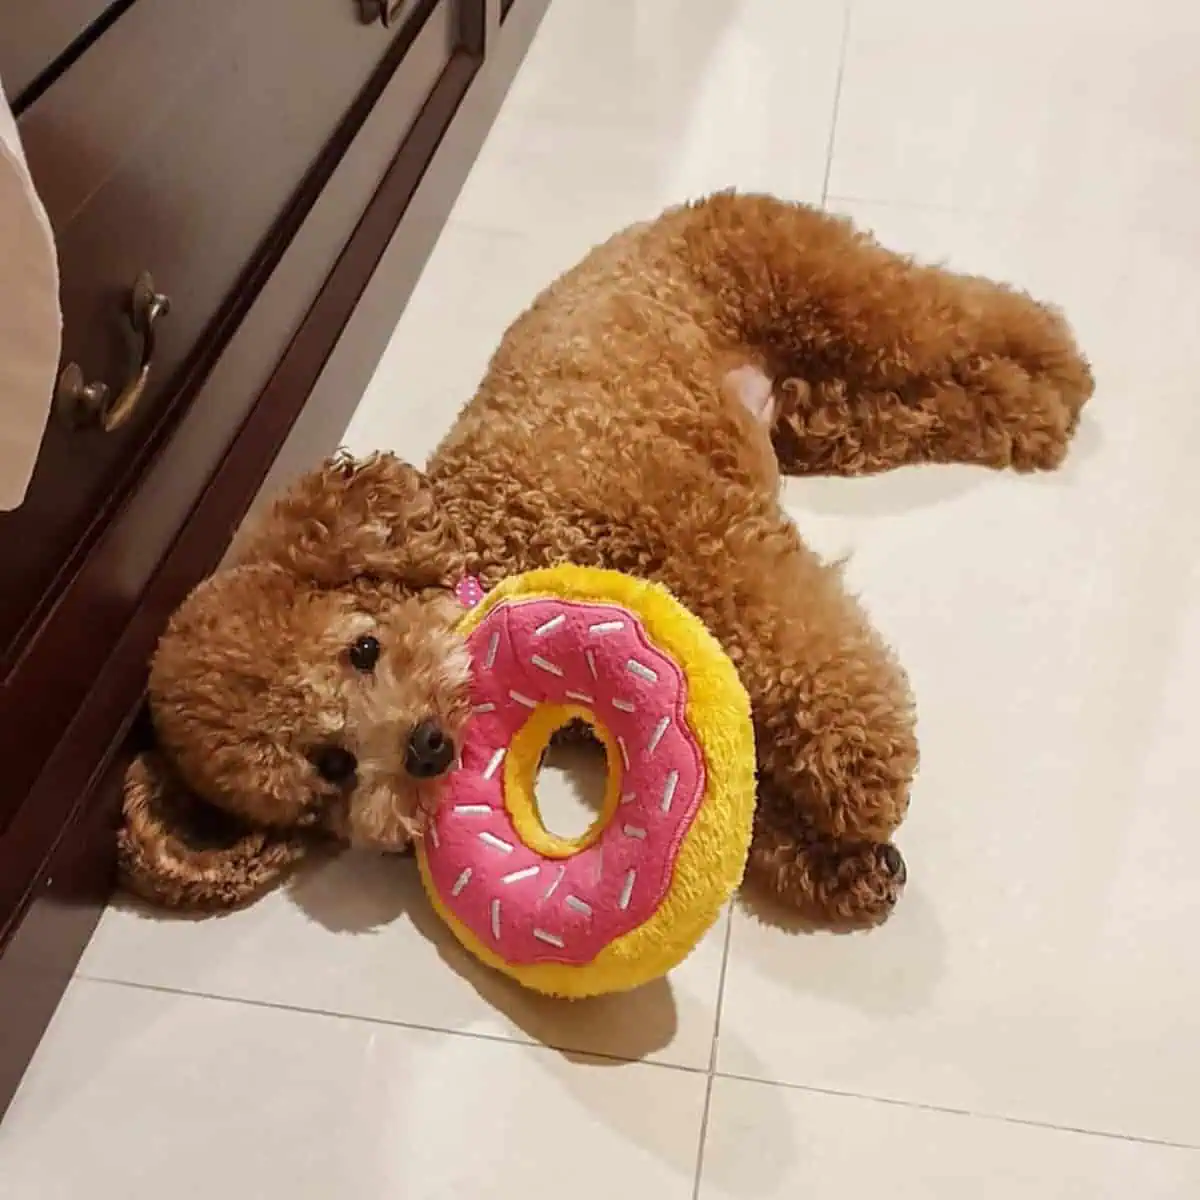 owner bought toy for Poodle